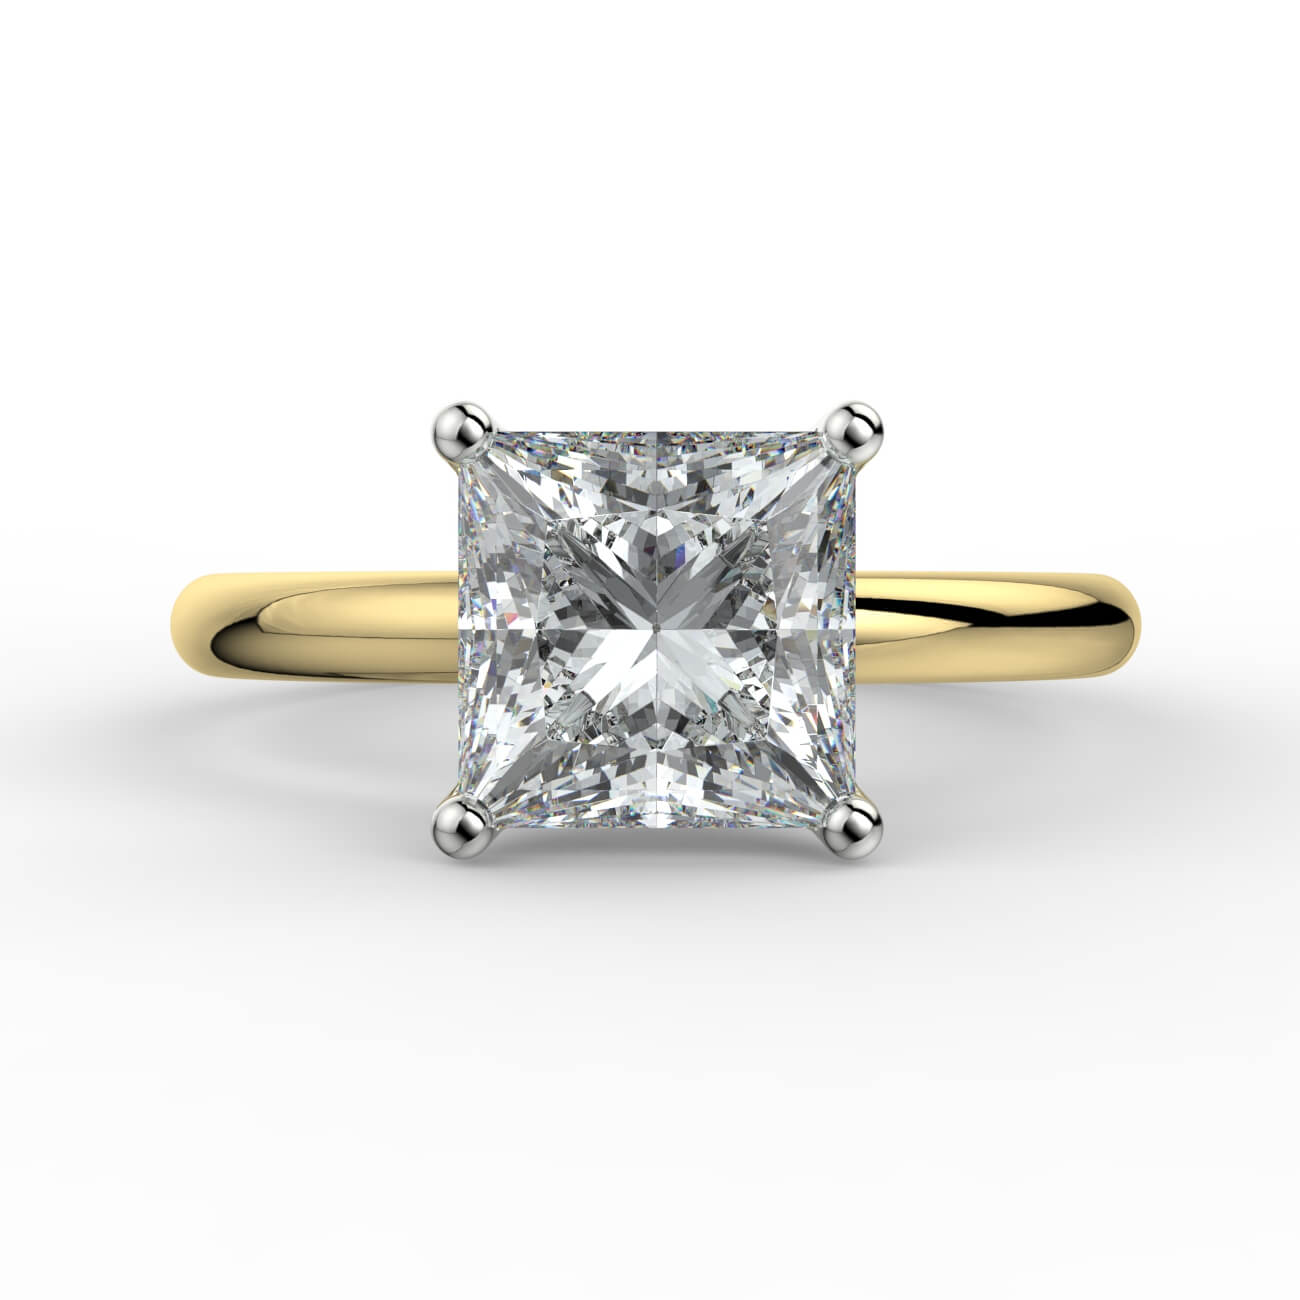 Solitaire princess cut diamond engagement ring in yellow and white gold – Australian Diamond Network